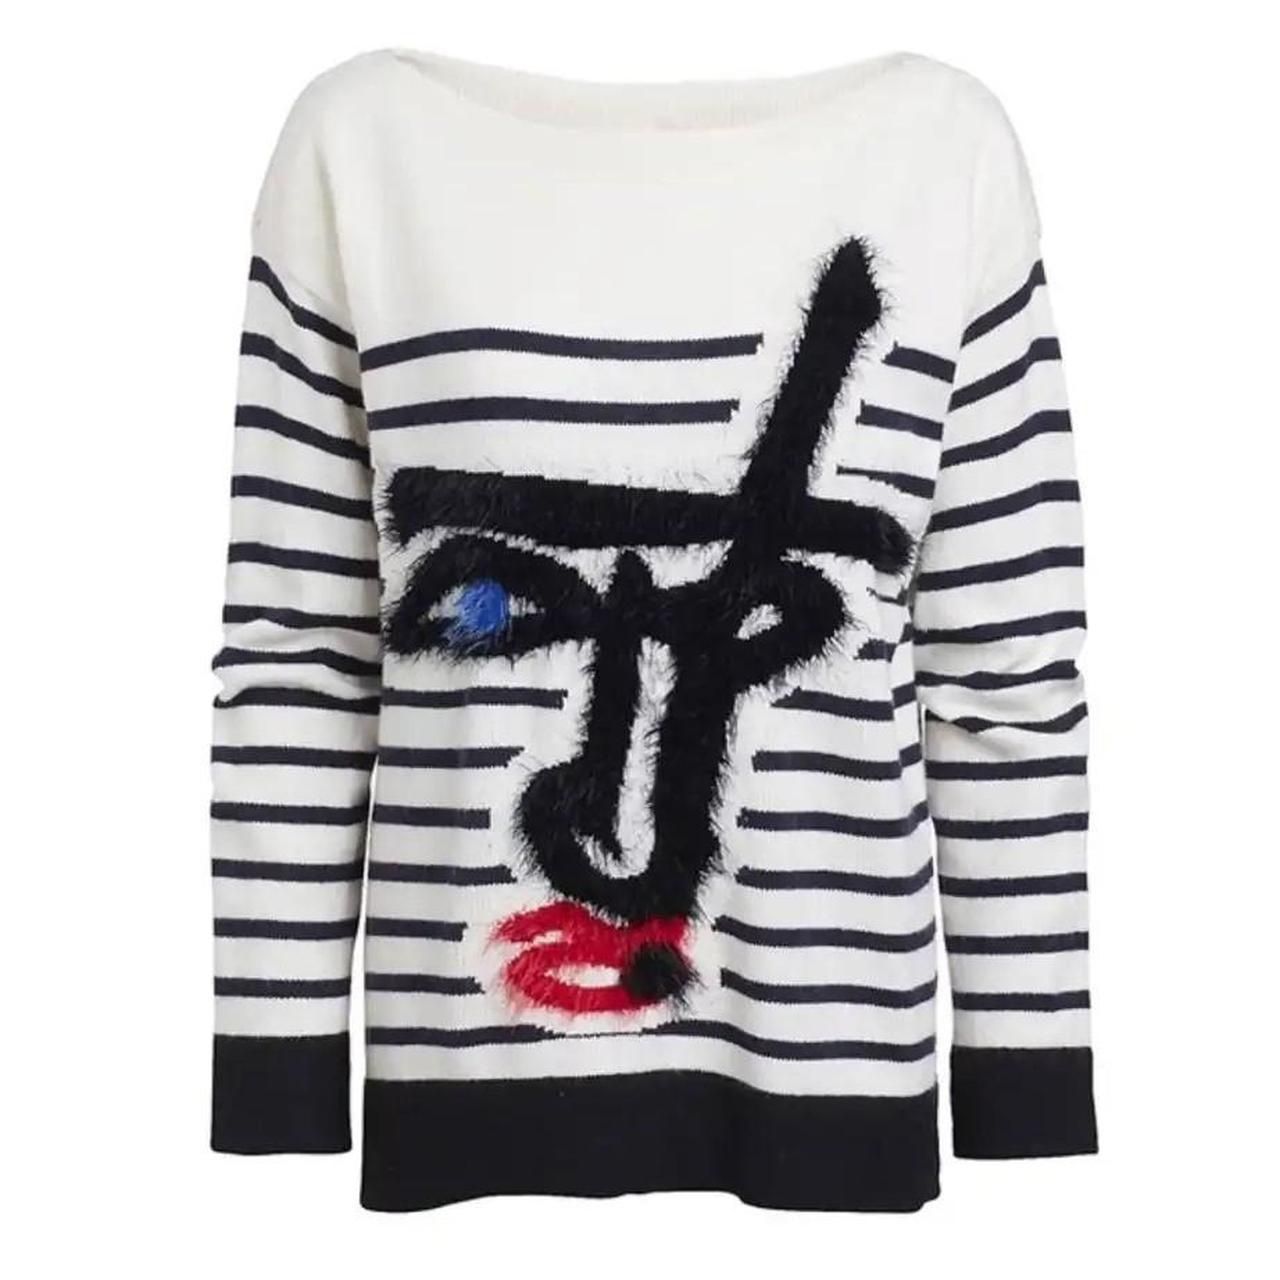 Jean Paul Gaultier x Lindex Picasso Face sweater sweter